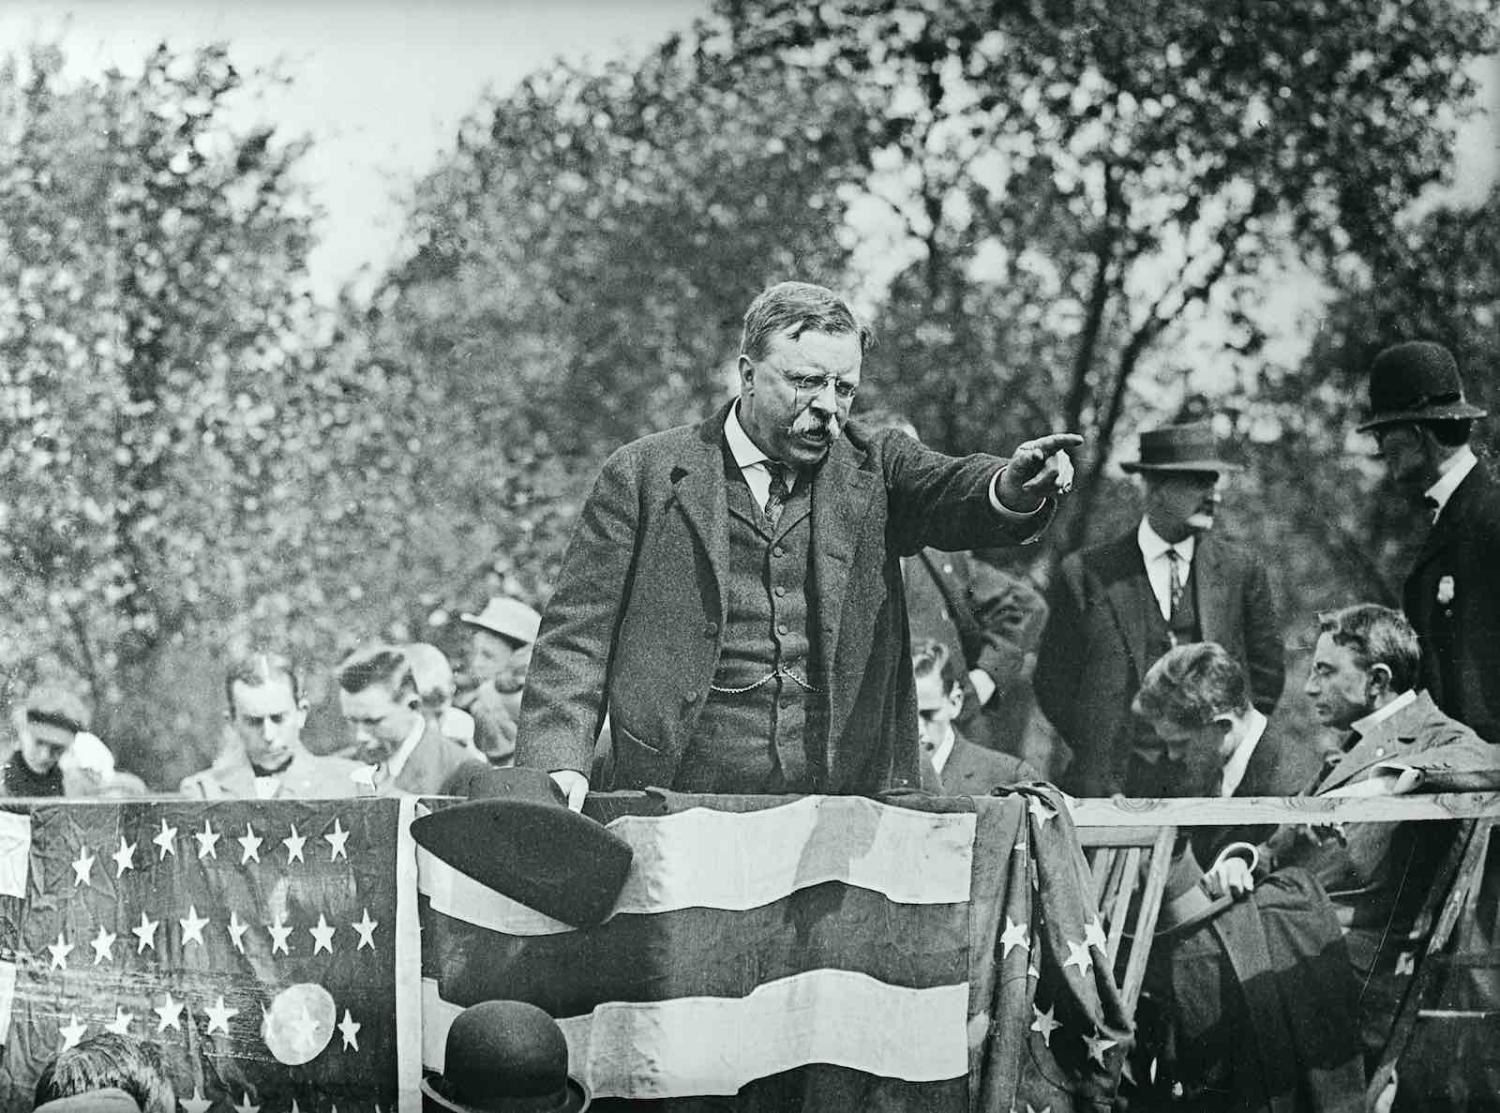 Theodore Roosevelt during a campaign rally speech circa 1900 (Bettmann via Getty Images)